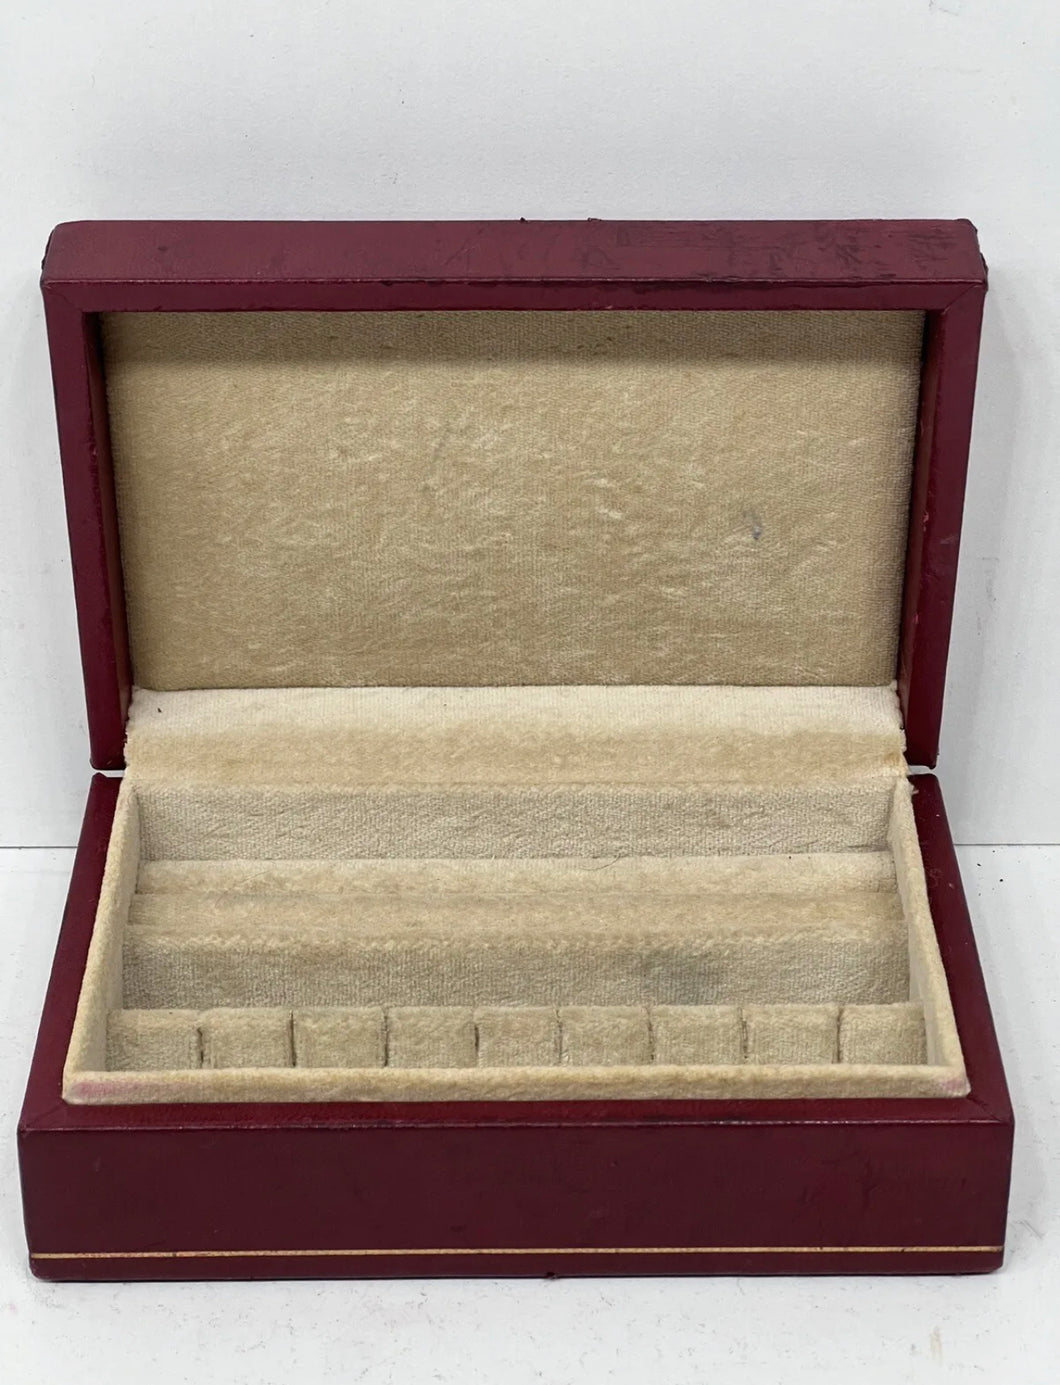 Beautiful vintage burgundy leather trinket jewellery box made in Italy